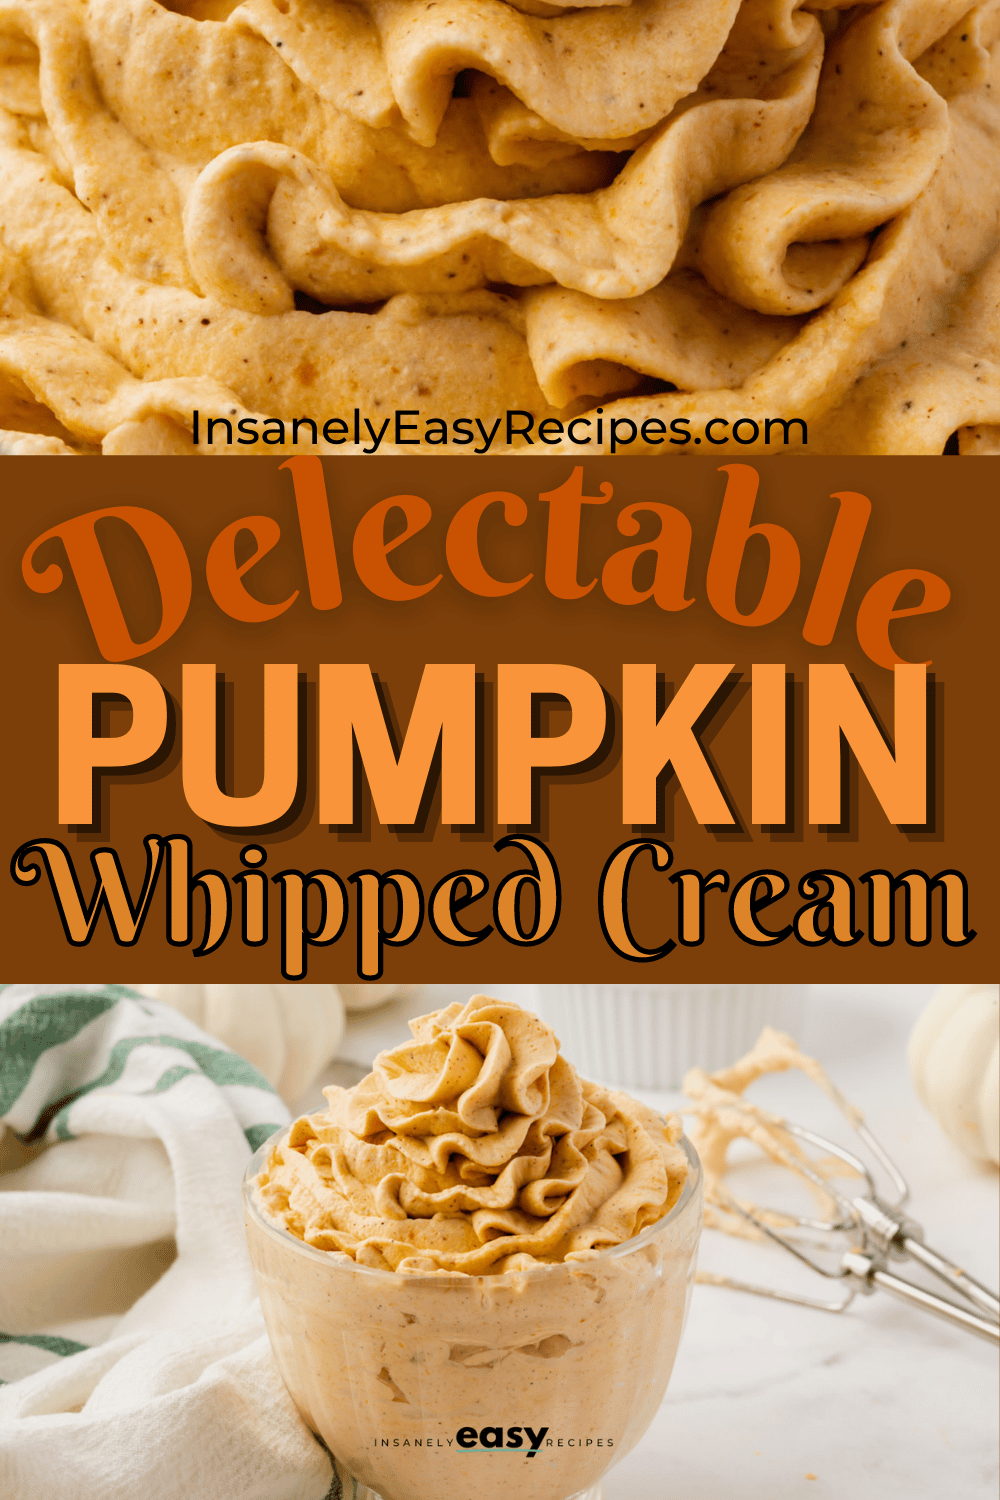 orange and brown whipped substance in a clear cup with text overlay delectable pumpkin whipped cream